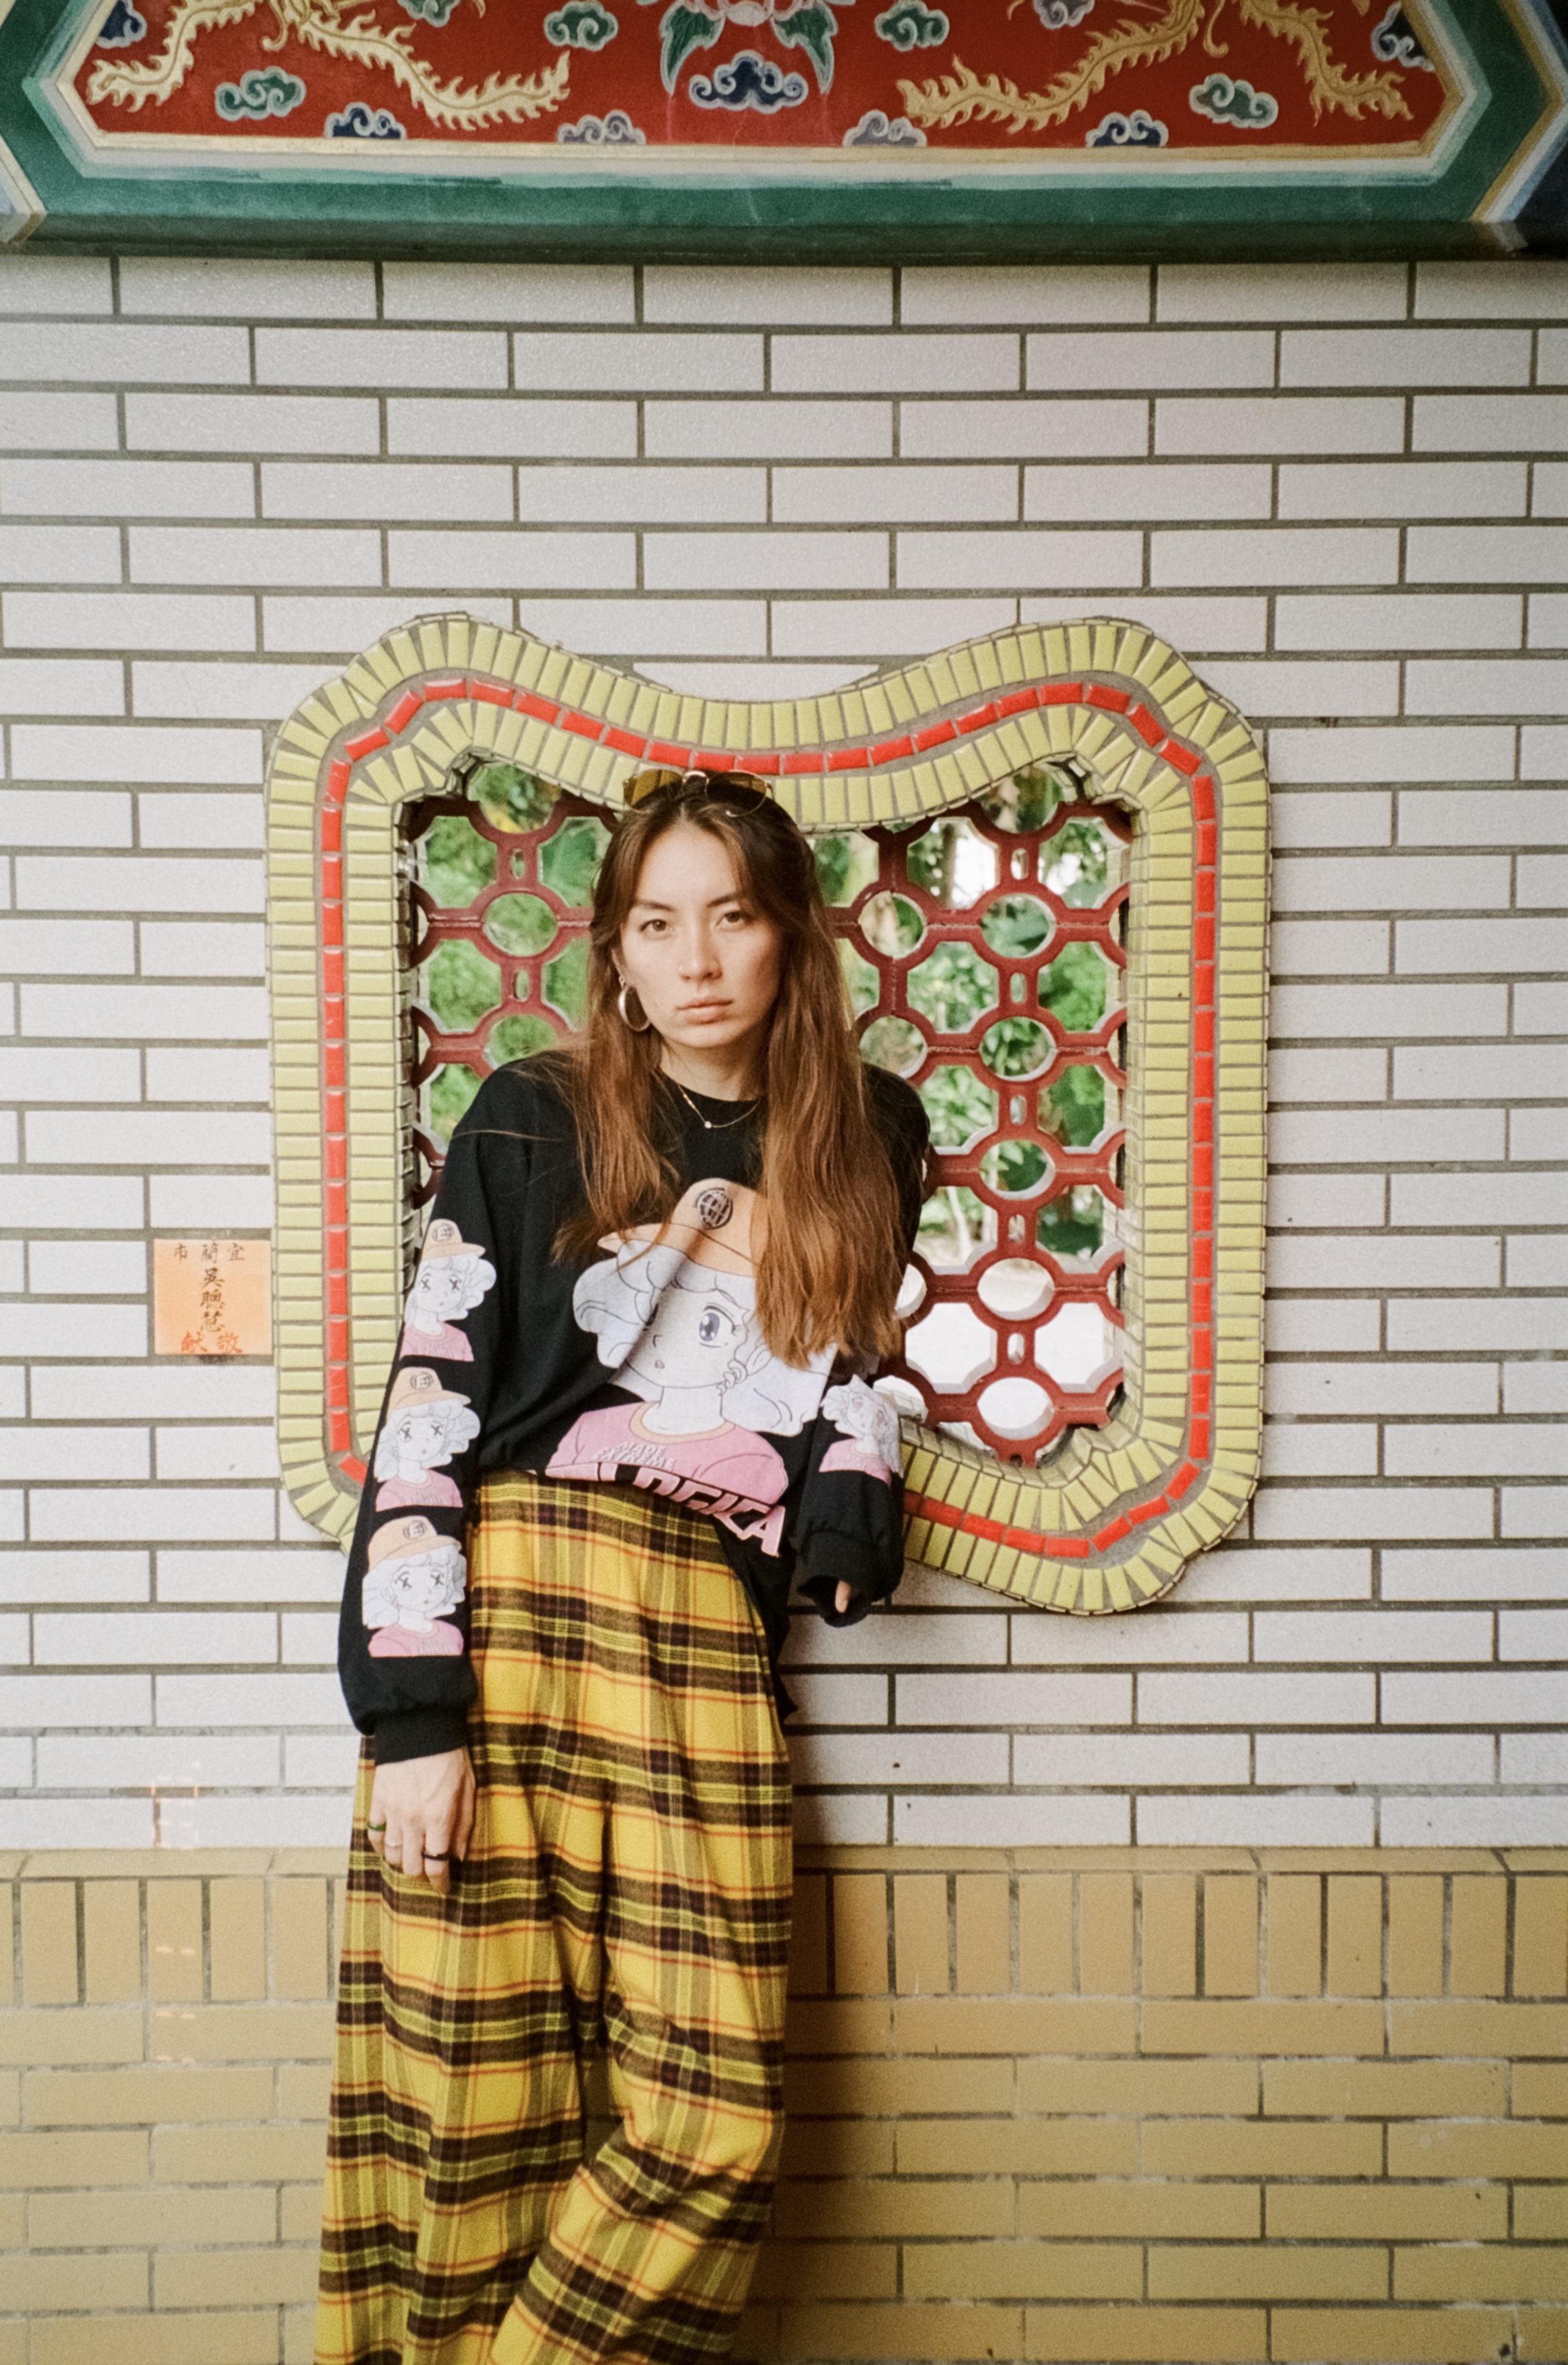 A Taiwanese Australian woman with long copper hair in an anime-print shirt and checkered pants leans against a wall in Taiwan.